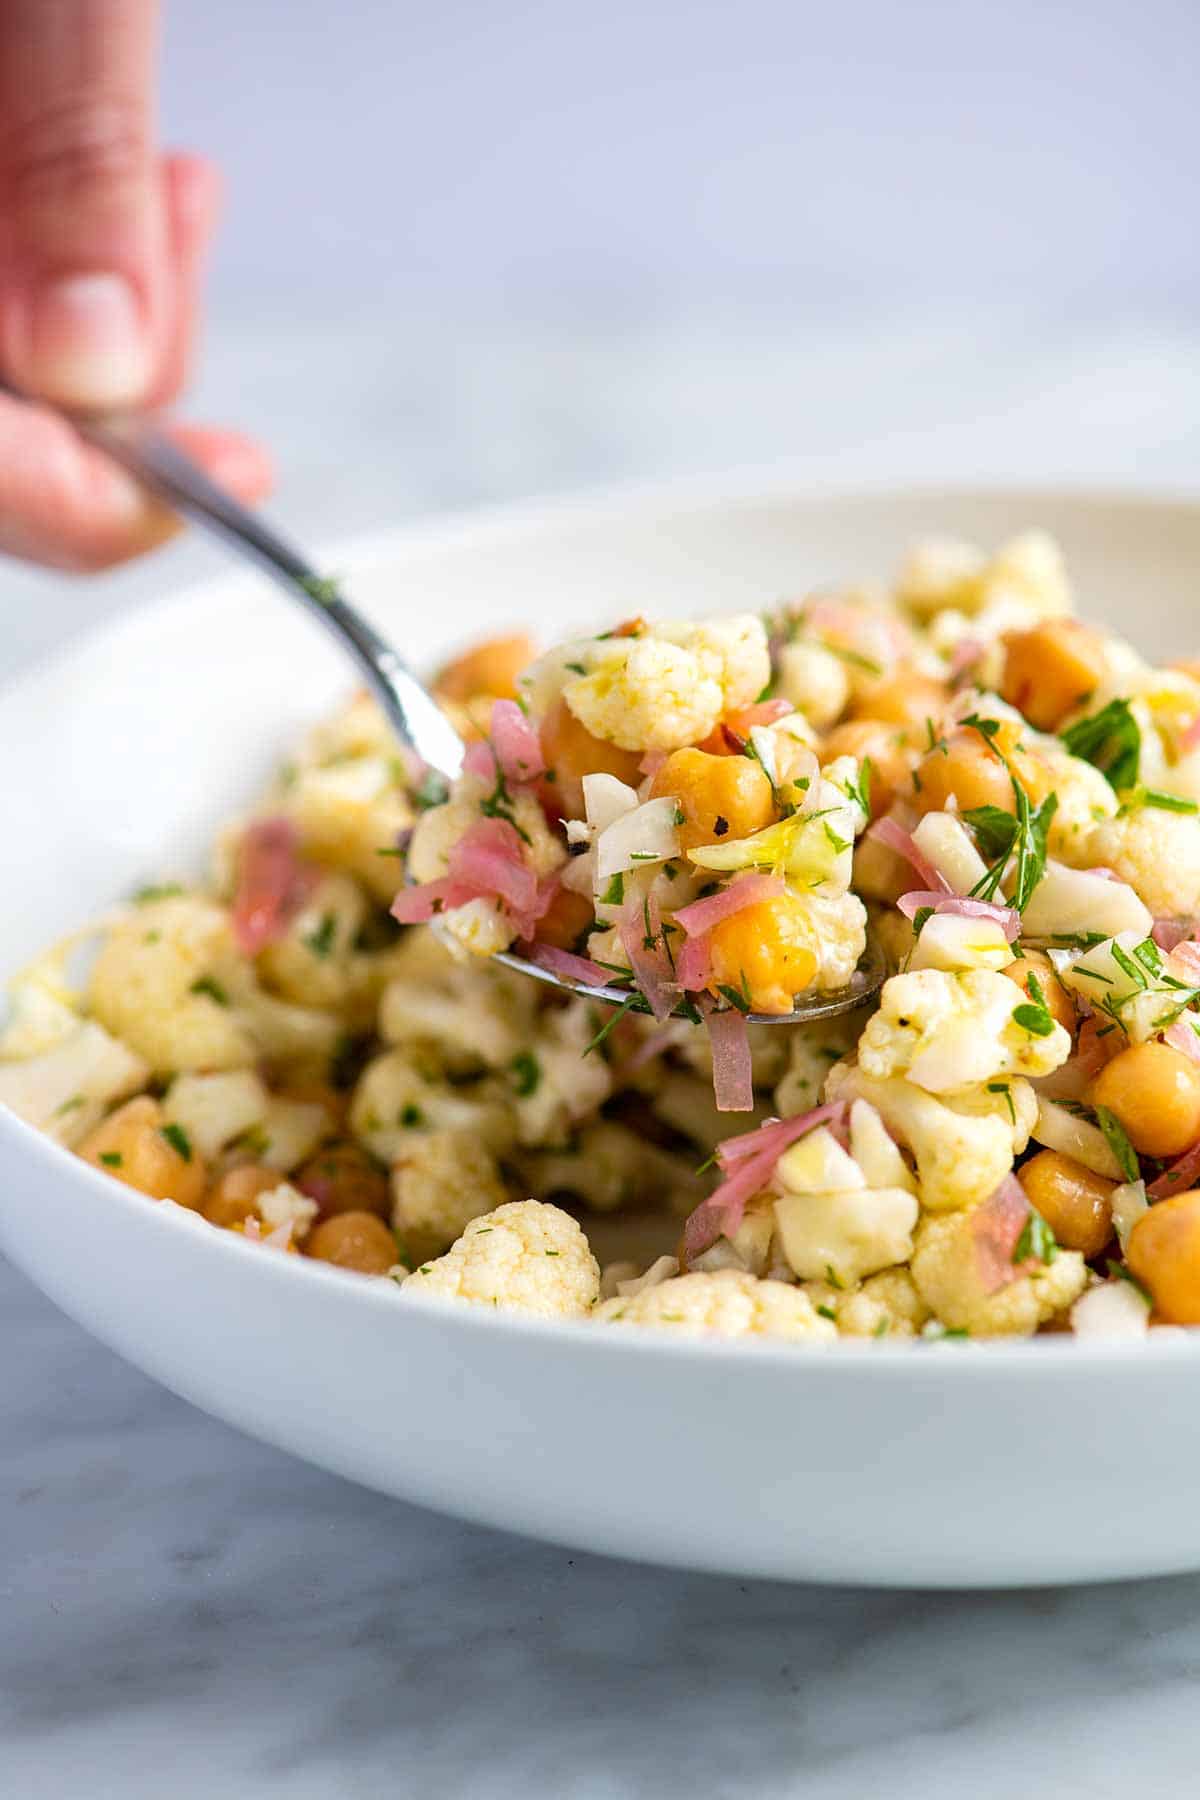 Easy Cauliflower Salad Recipe with Chickpeas and a Lemon Dressing 